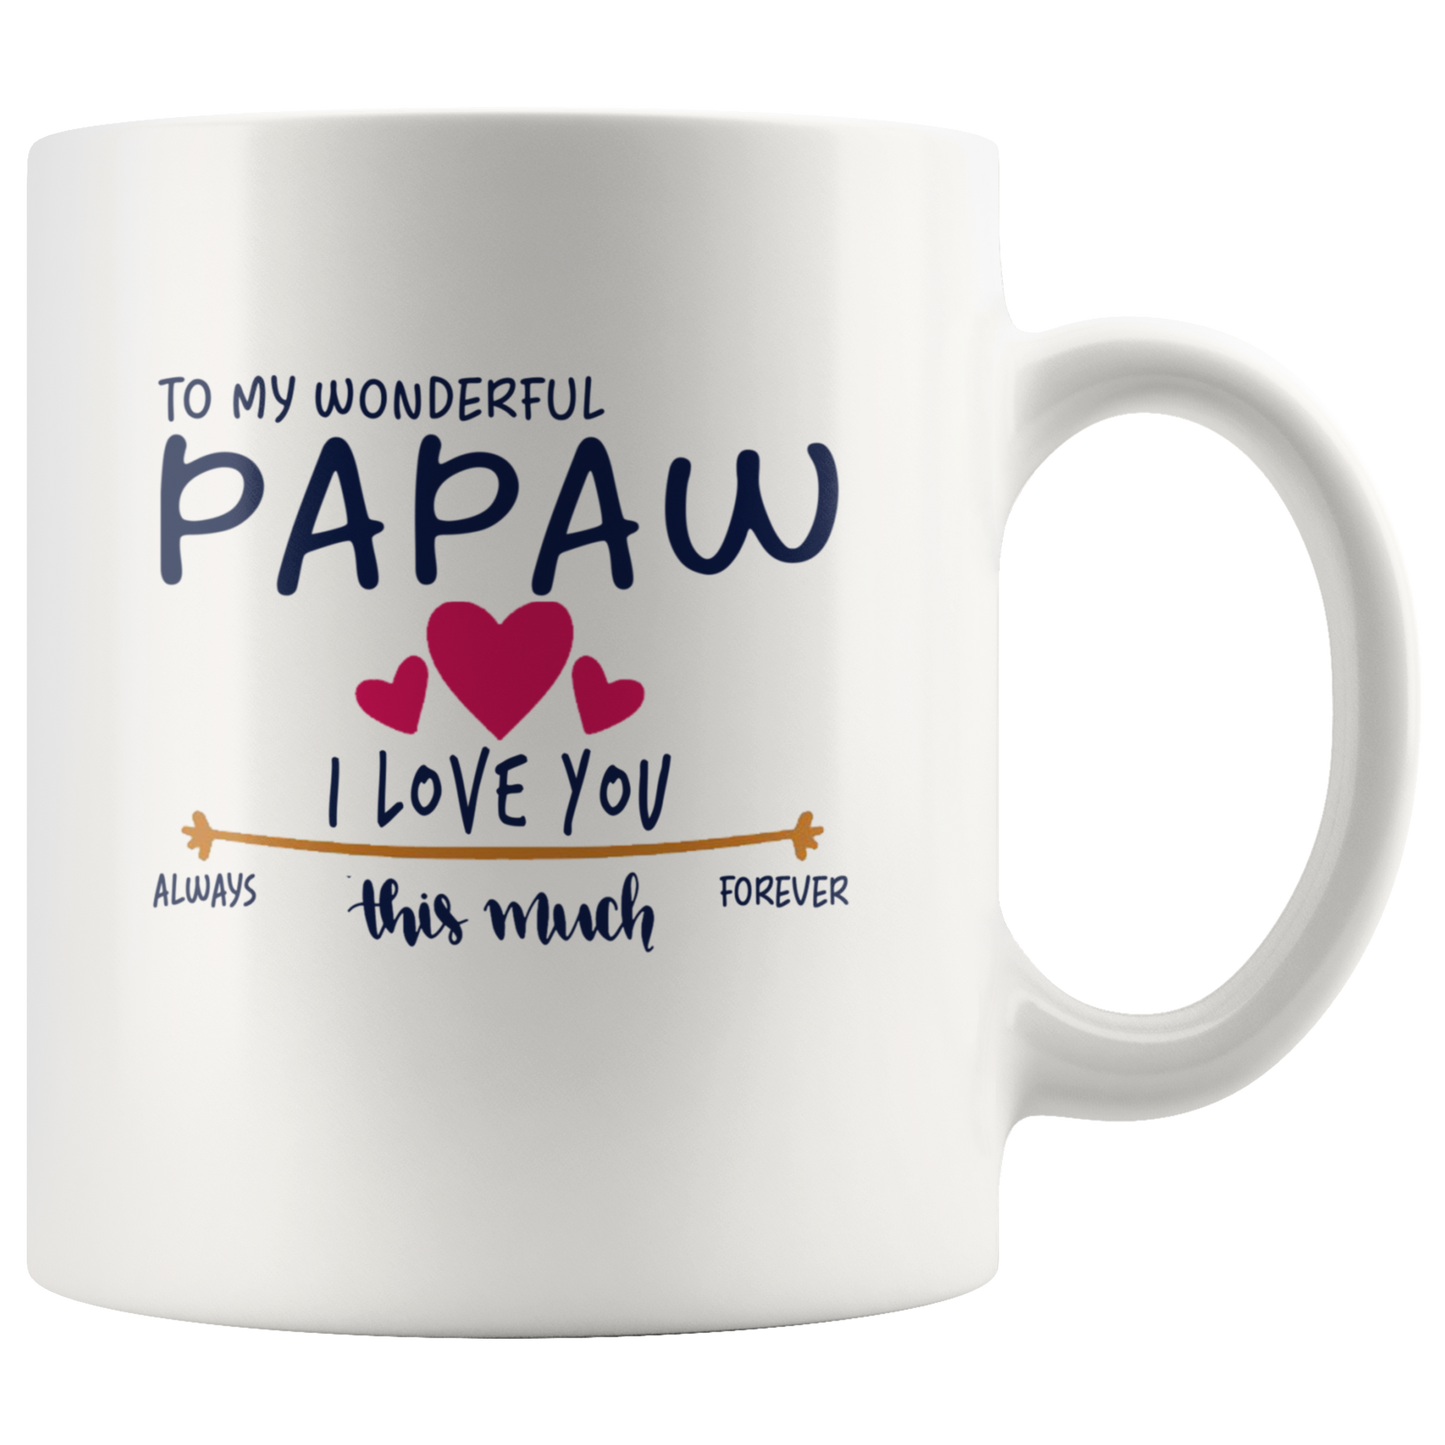 M-21397775-sp-23381 - Mother Day Gifts - To My Wonderful Papaw I Love You This Muc